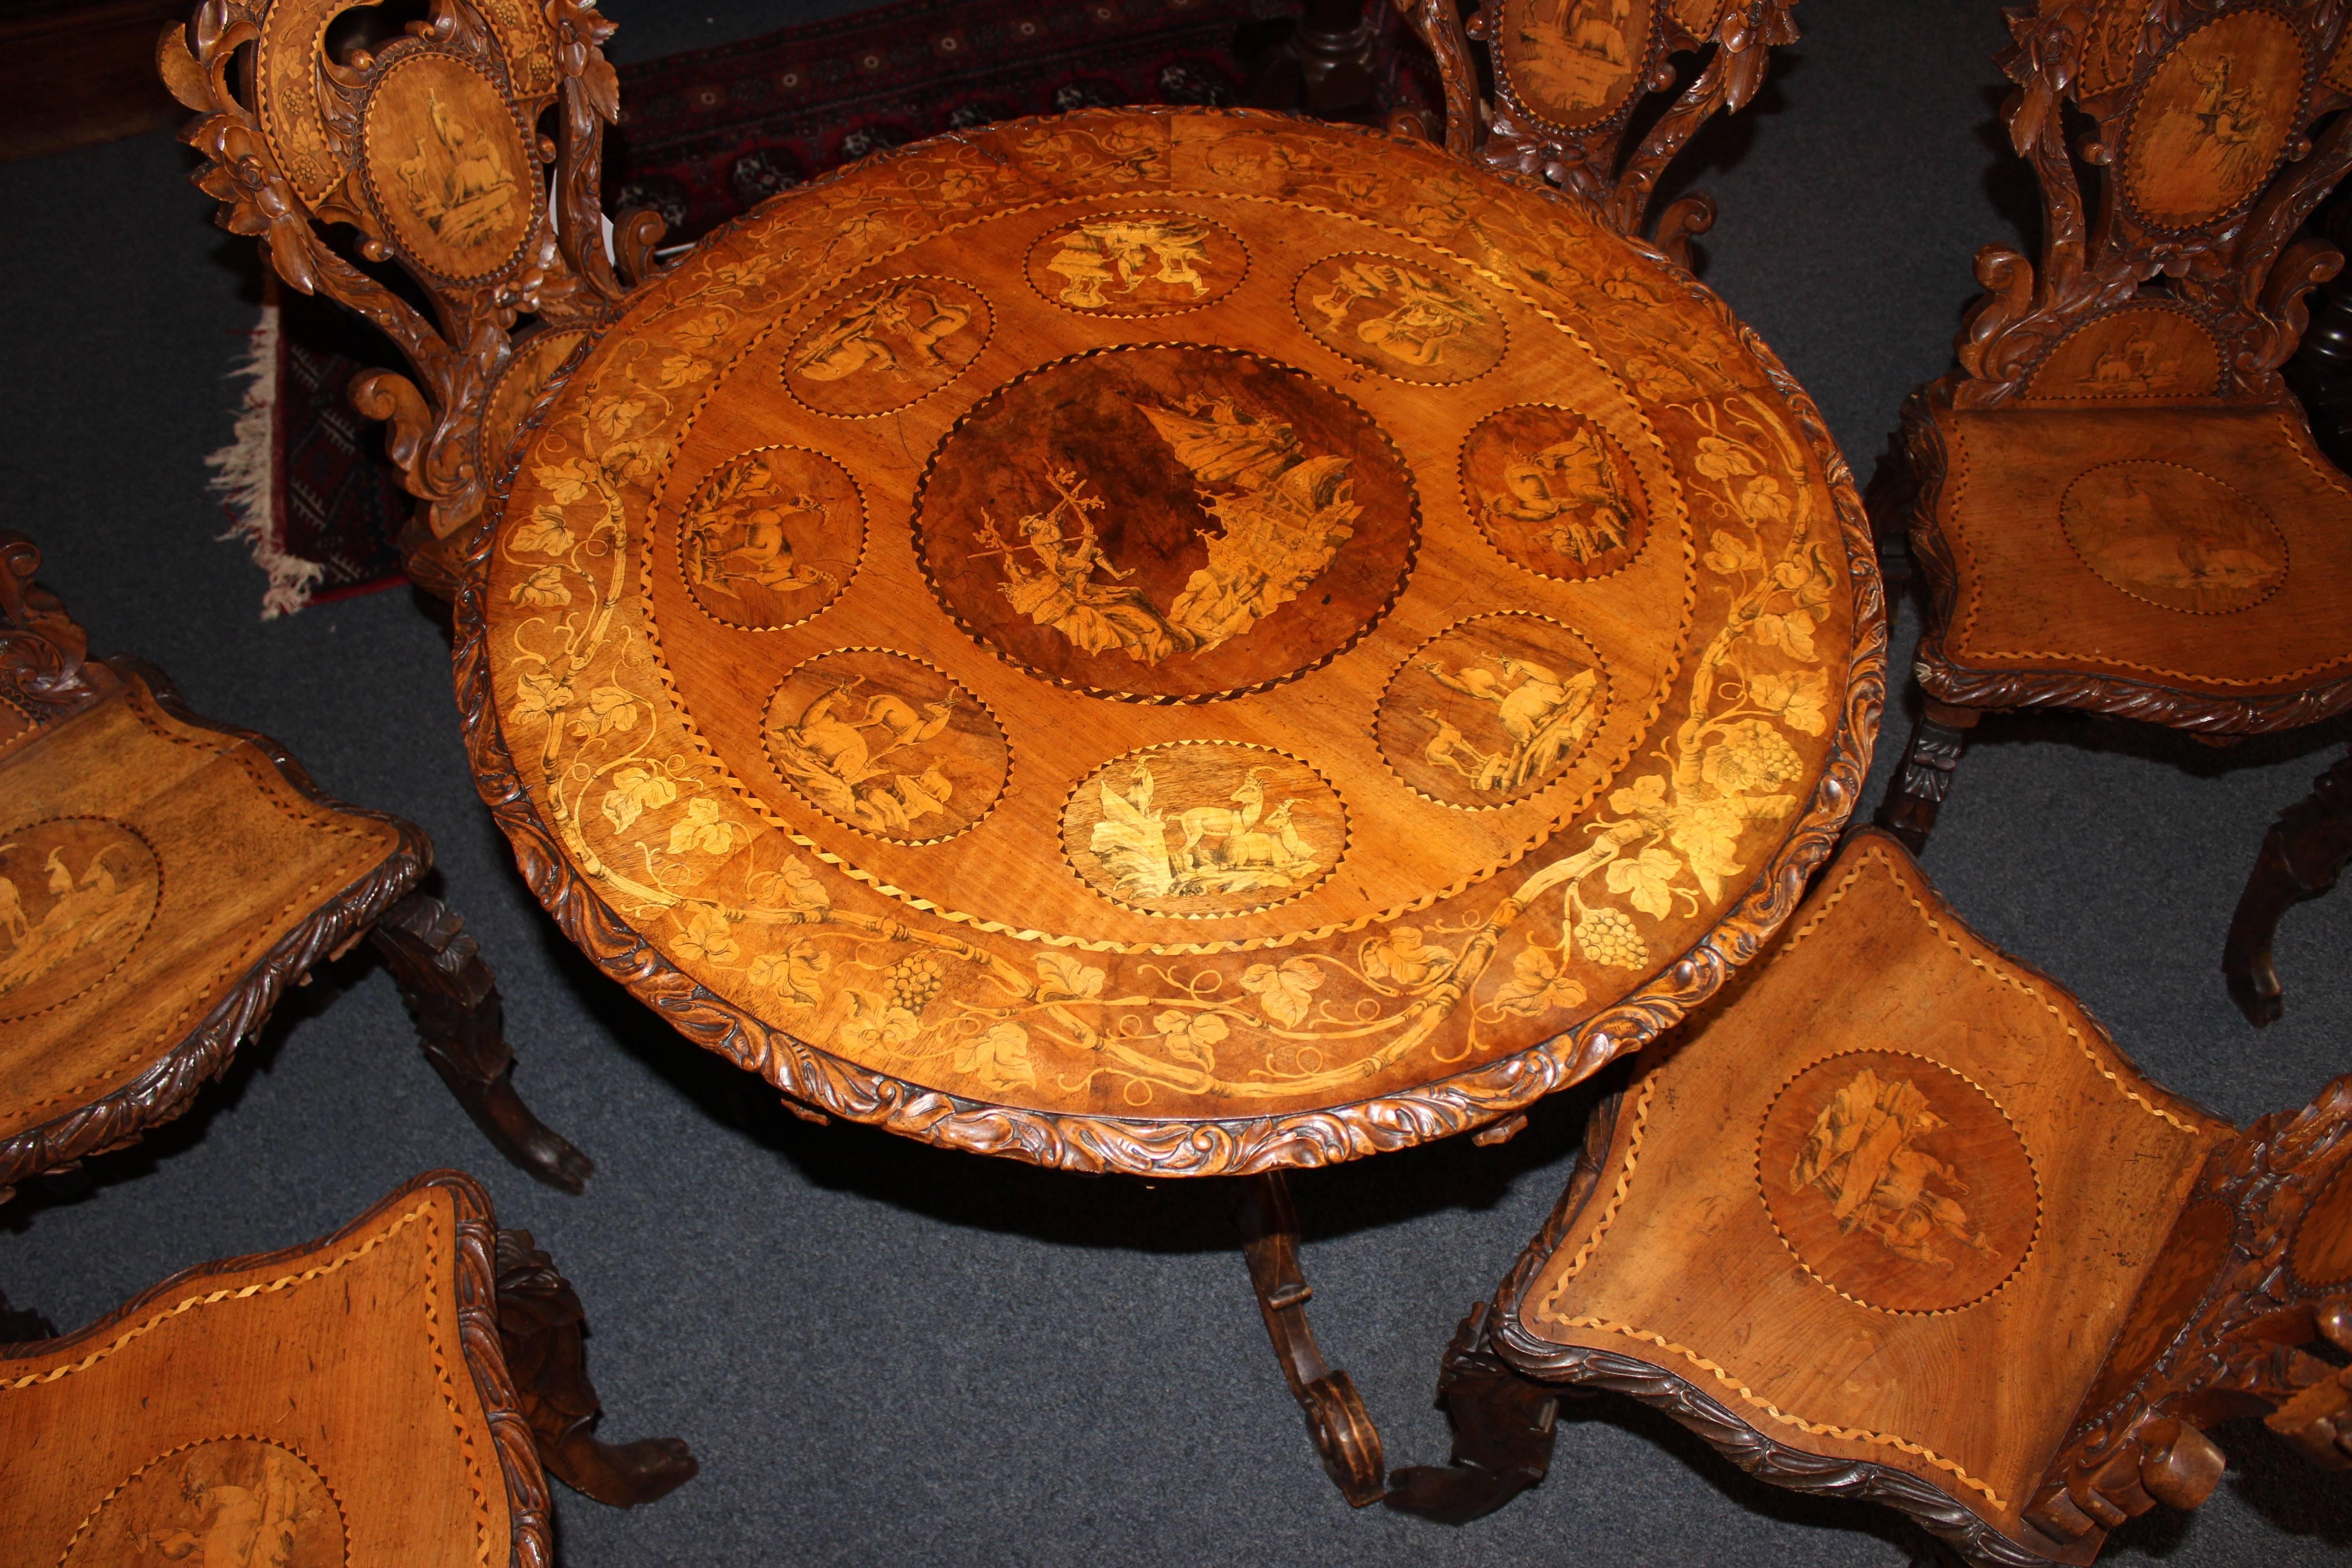 This early 20th century black forest style table used to be carried outside for picnics. Comes with the one foldable table and six chairs that can be taken apart. Features multiple unique and ornate inlaid scenes as well as beautifully carved